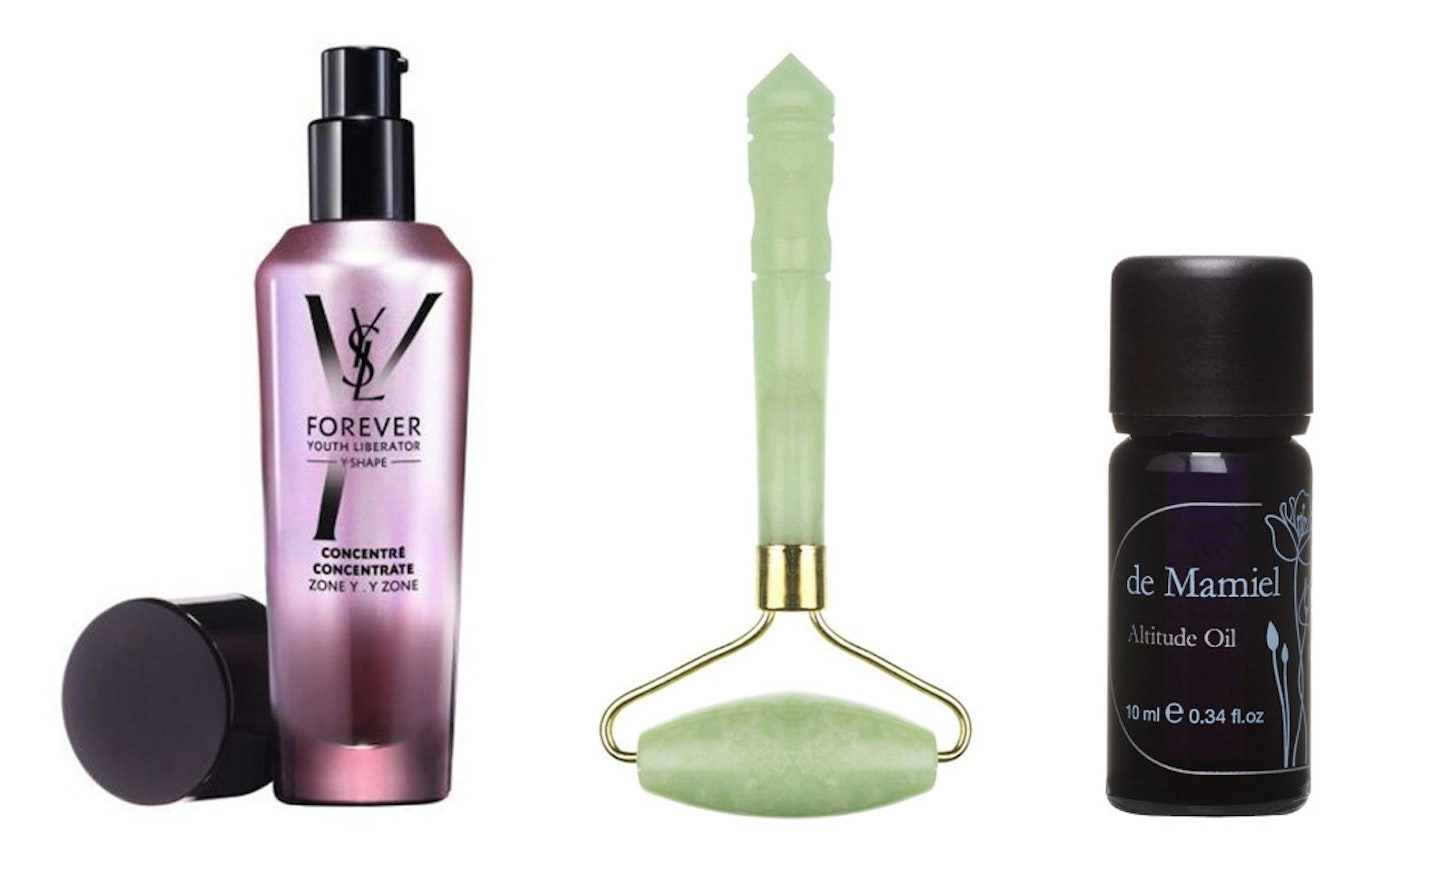 Ying Yu jade facial rollers, &pound;28; Yves Saint Laurent Forever youth liberator Y-shape concentrate, &pound;65; De Mamiel Altitude Oil, &pound;26